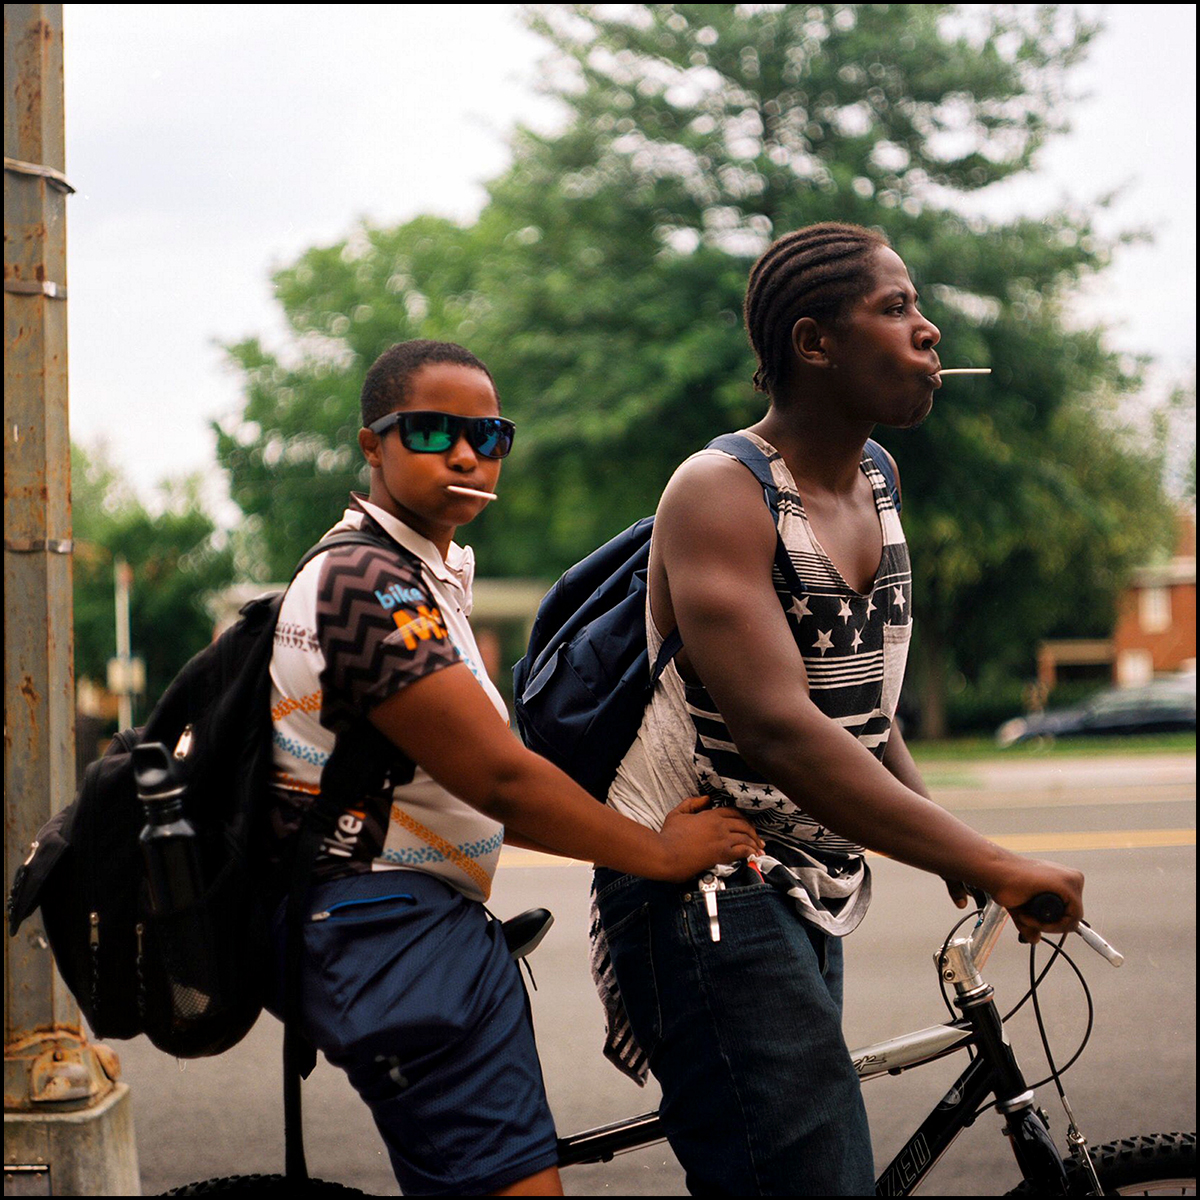 A travel storytelling slideshow featuring Murugi's photography: 1 of 9 - Two young boys ride a tandem bike in D.C.